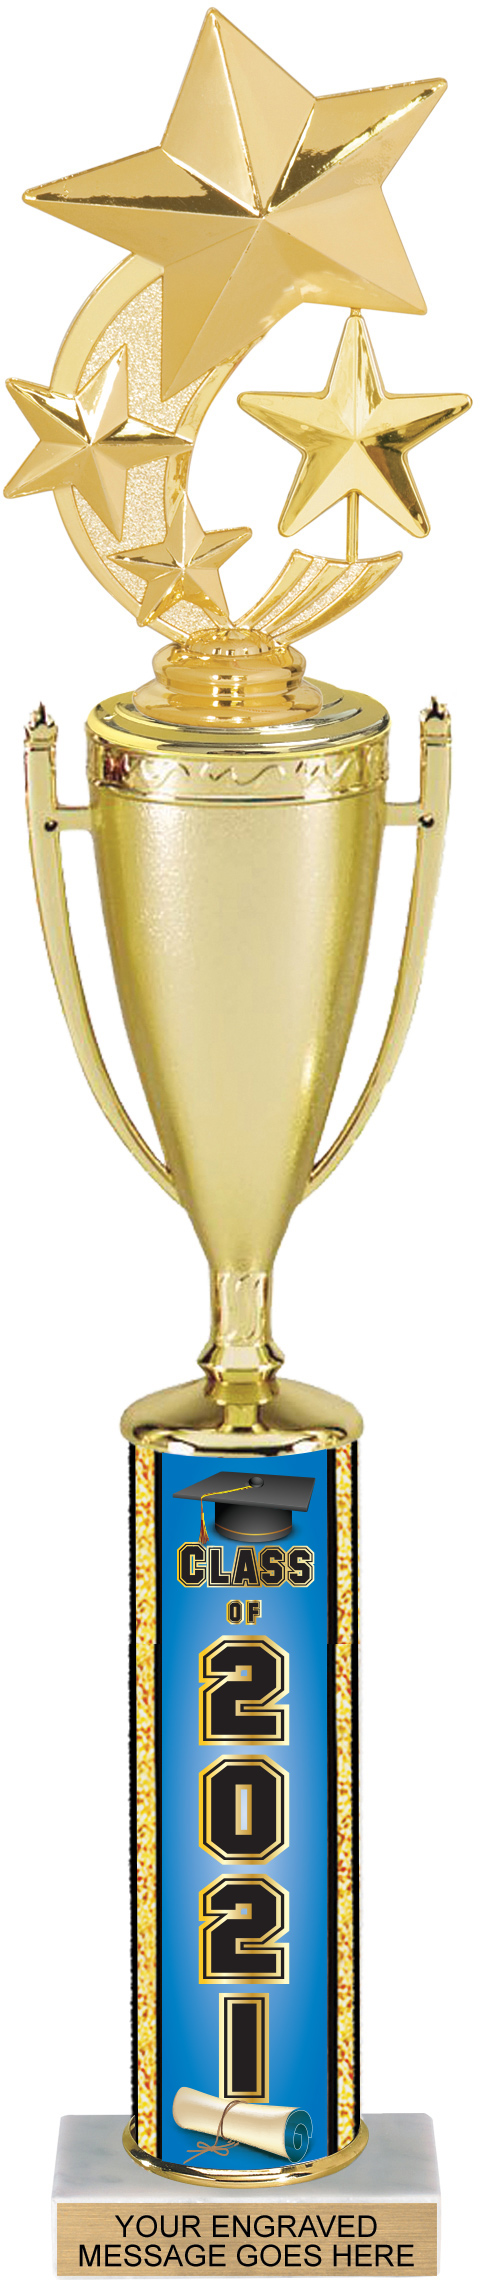 Column Cup Trophy Class of 2021 - 17 inch